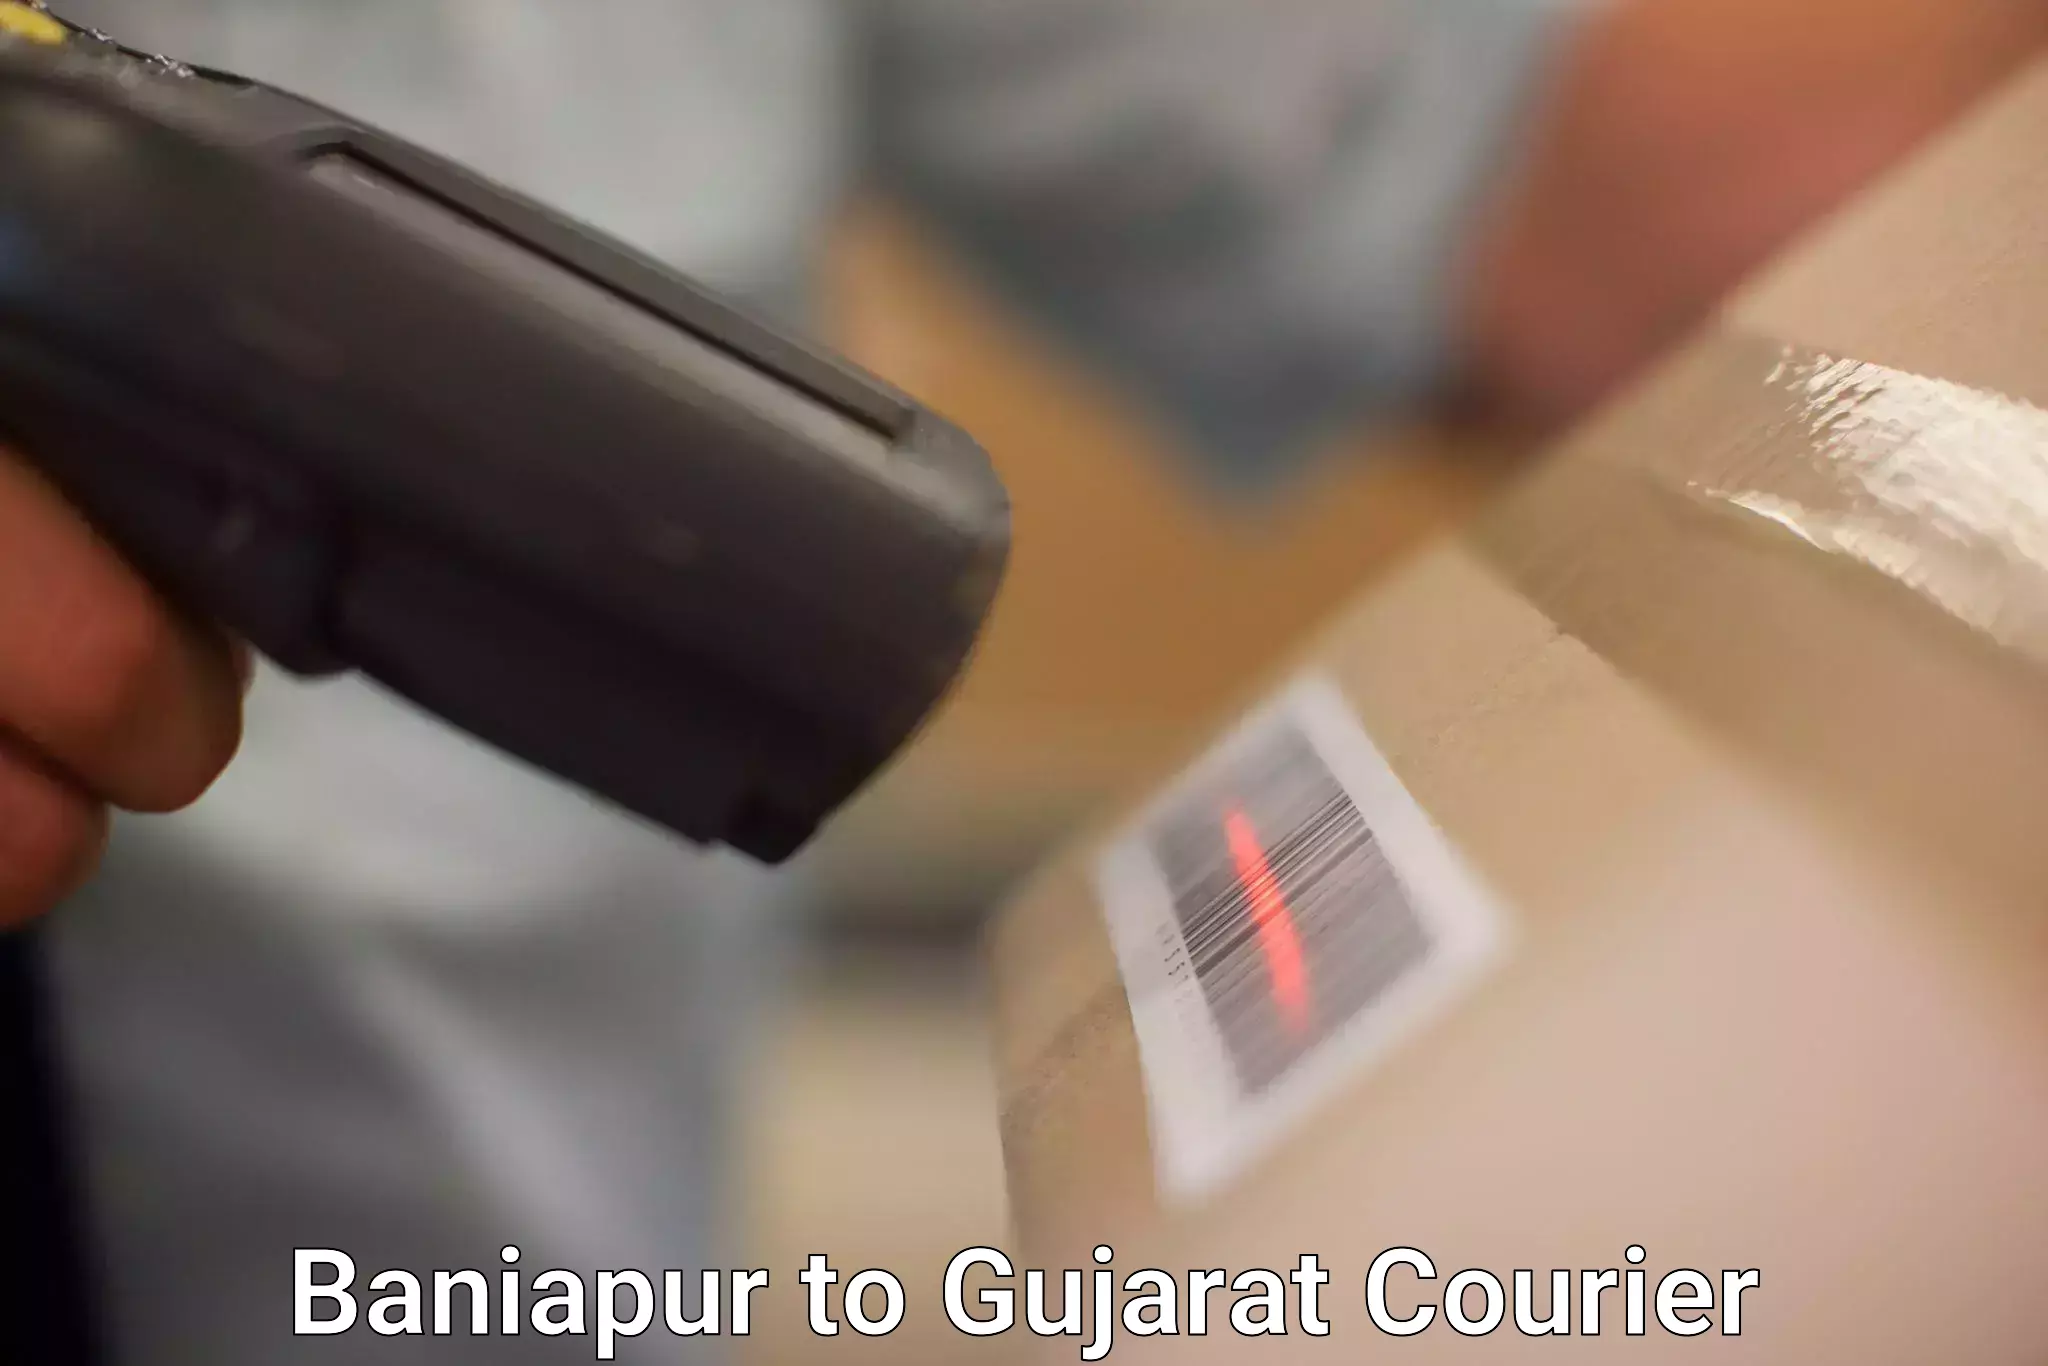 Package delivery network Baniapur to Gujarat